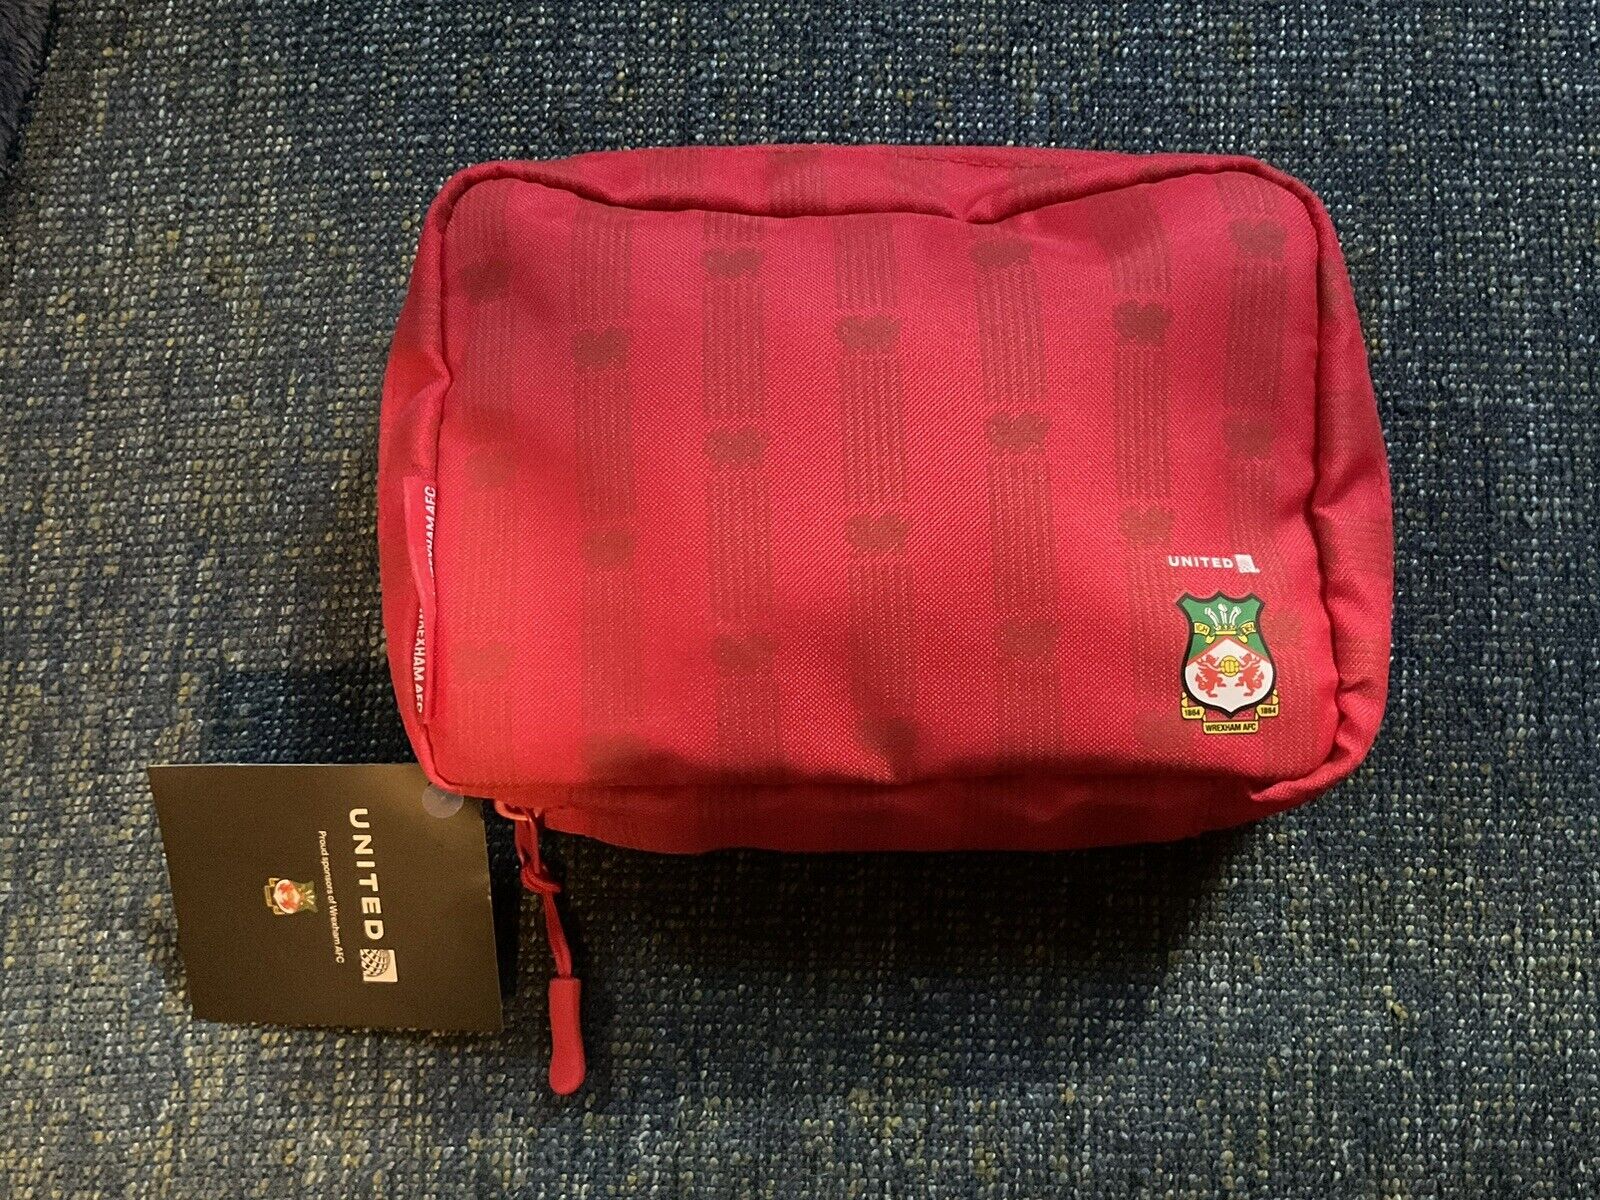 United Airlines Limited Edition Wrexham Polaris Amenity kit Red New Unopened